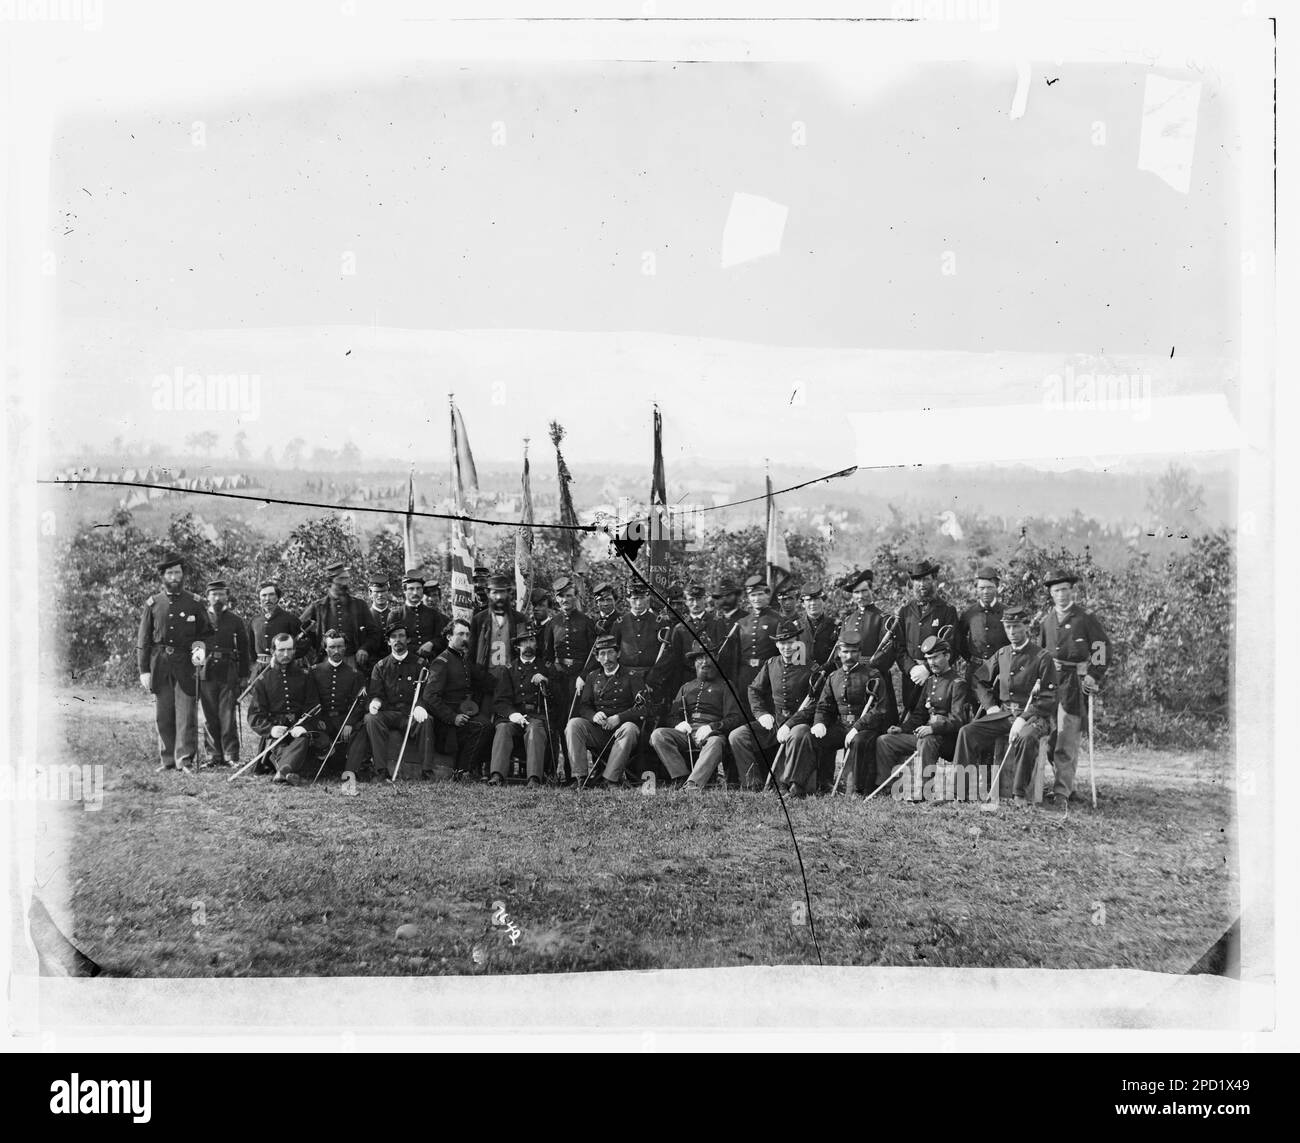 Lieutenant Colonel James J. Smith and officers of 69th New York Infantry (Irish Brigade). Civil war photographs, 1861-1865 . United States, History, Civil War, 1861-1865. Stock Photo